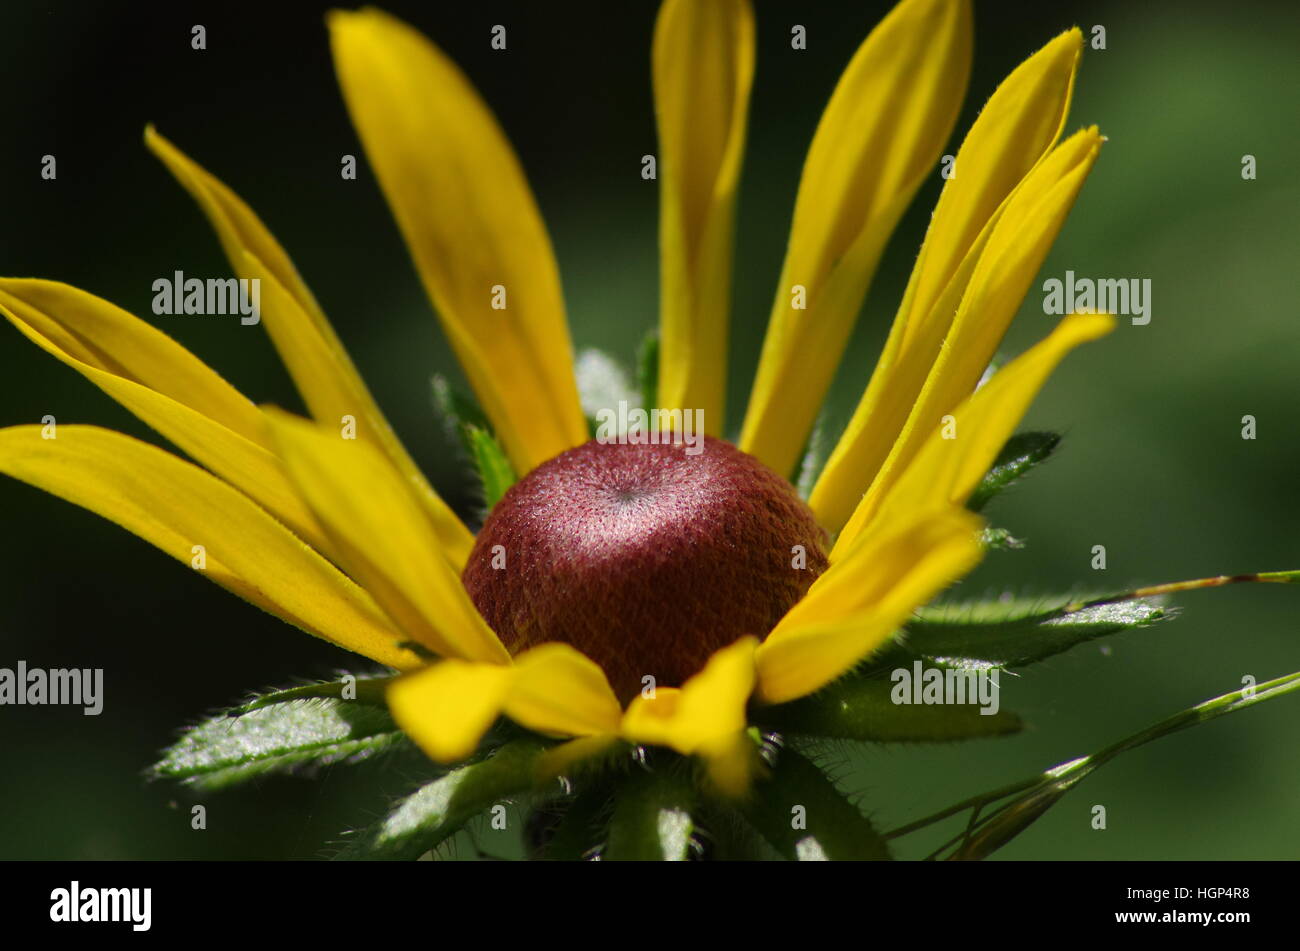 Sunny wild yellow flower with red middle, green fuzzy leaves, and blurry green and black background Stock Photo